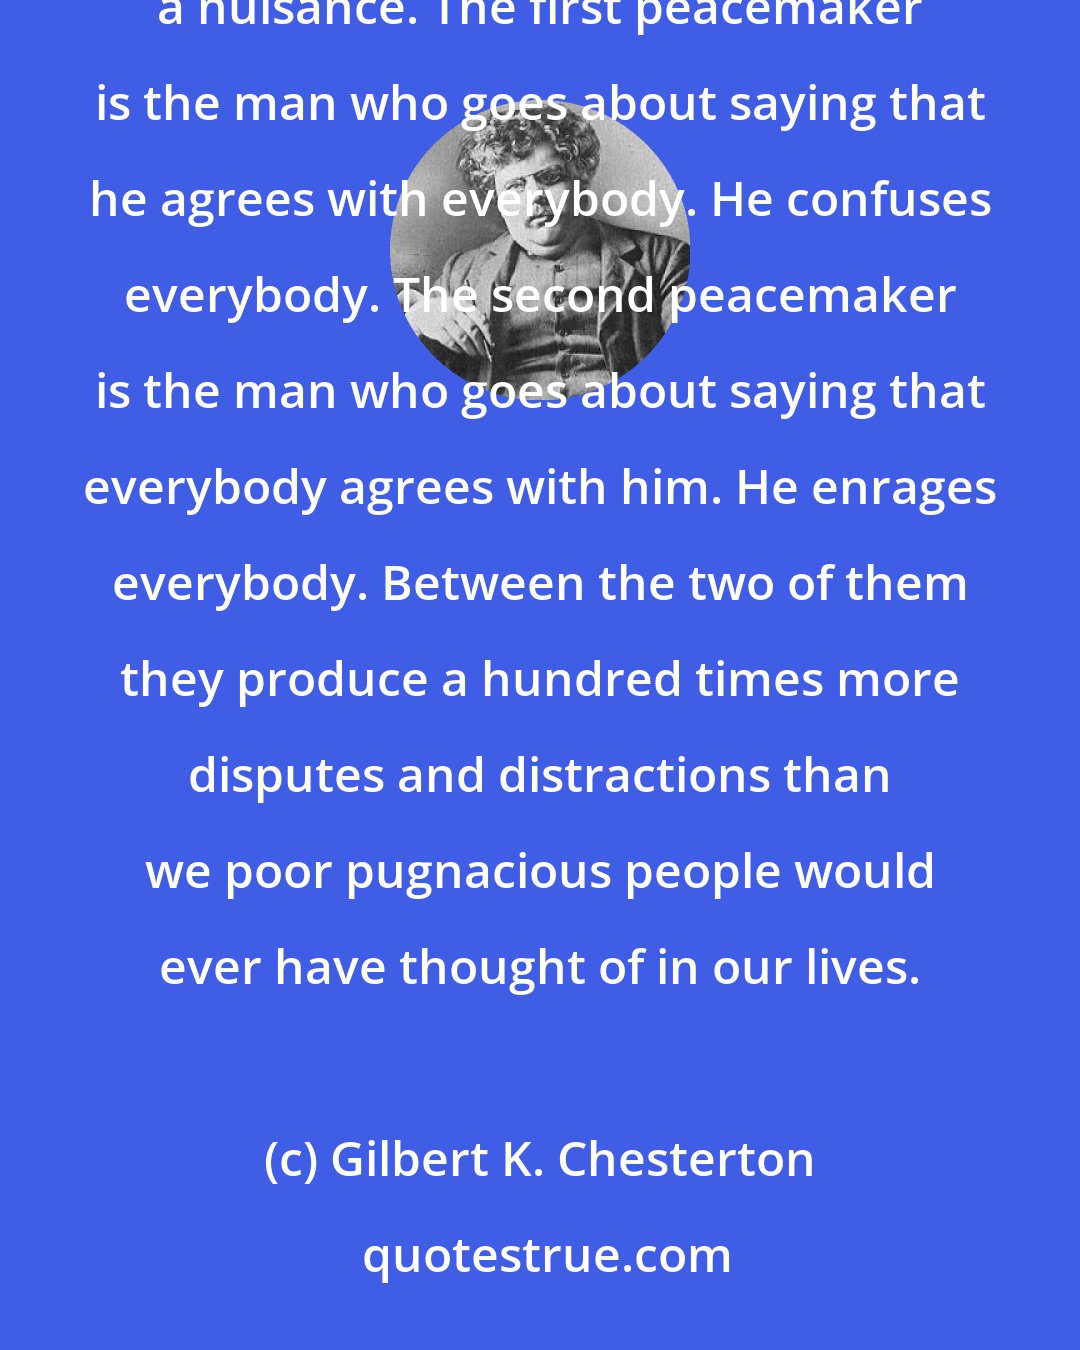 Gilbert K. Chesterton: There are two kinds of peacemakers in the modern world; and they are both, though in various ways, a nuisance. The first peacemaker is the man who goes about saying that he agrees with everybody. He confuses everybody. The second peacemaker is the man who goes about saying that everybody agrees with him. He enrages everybody. Between the two of them they produce a hundred times more disputes and distractions than we poor pugnacious people would ever have thought of in our lives.